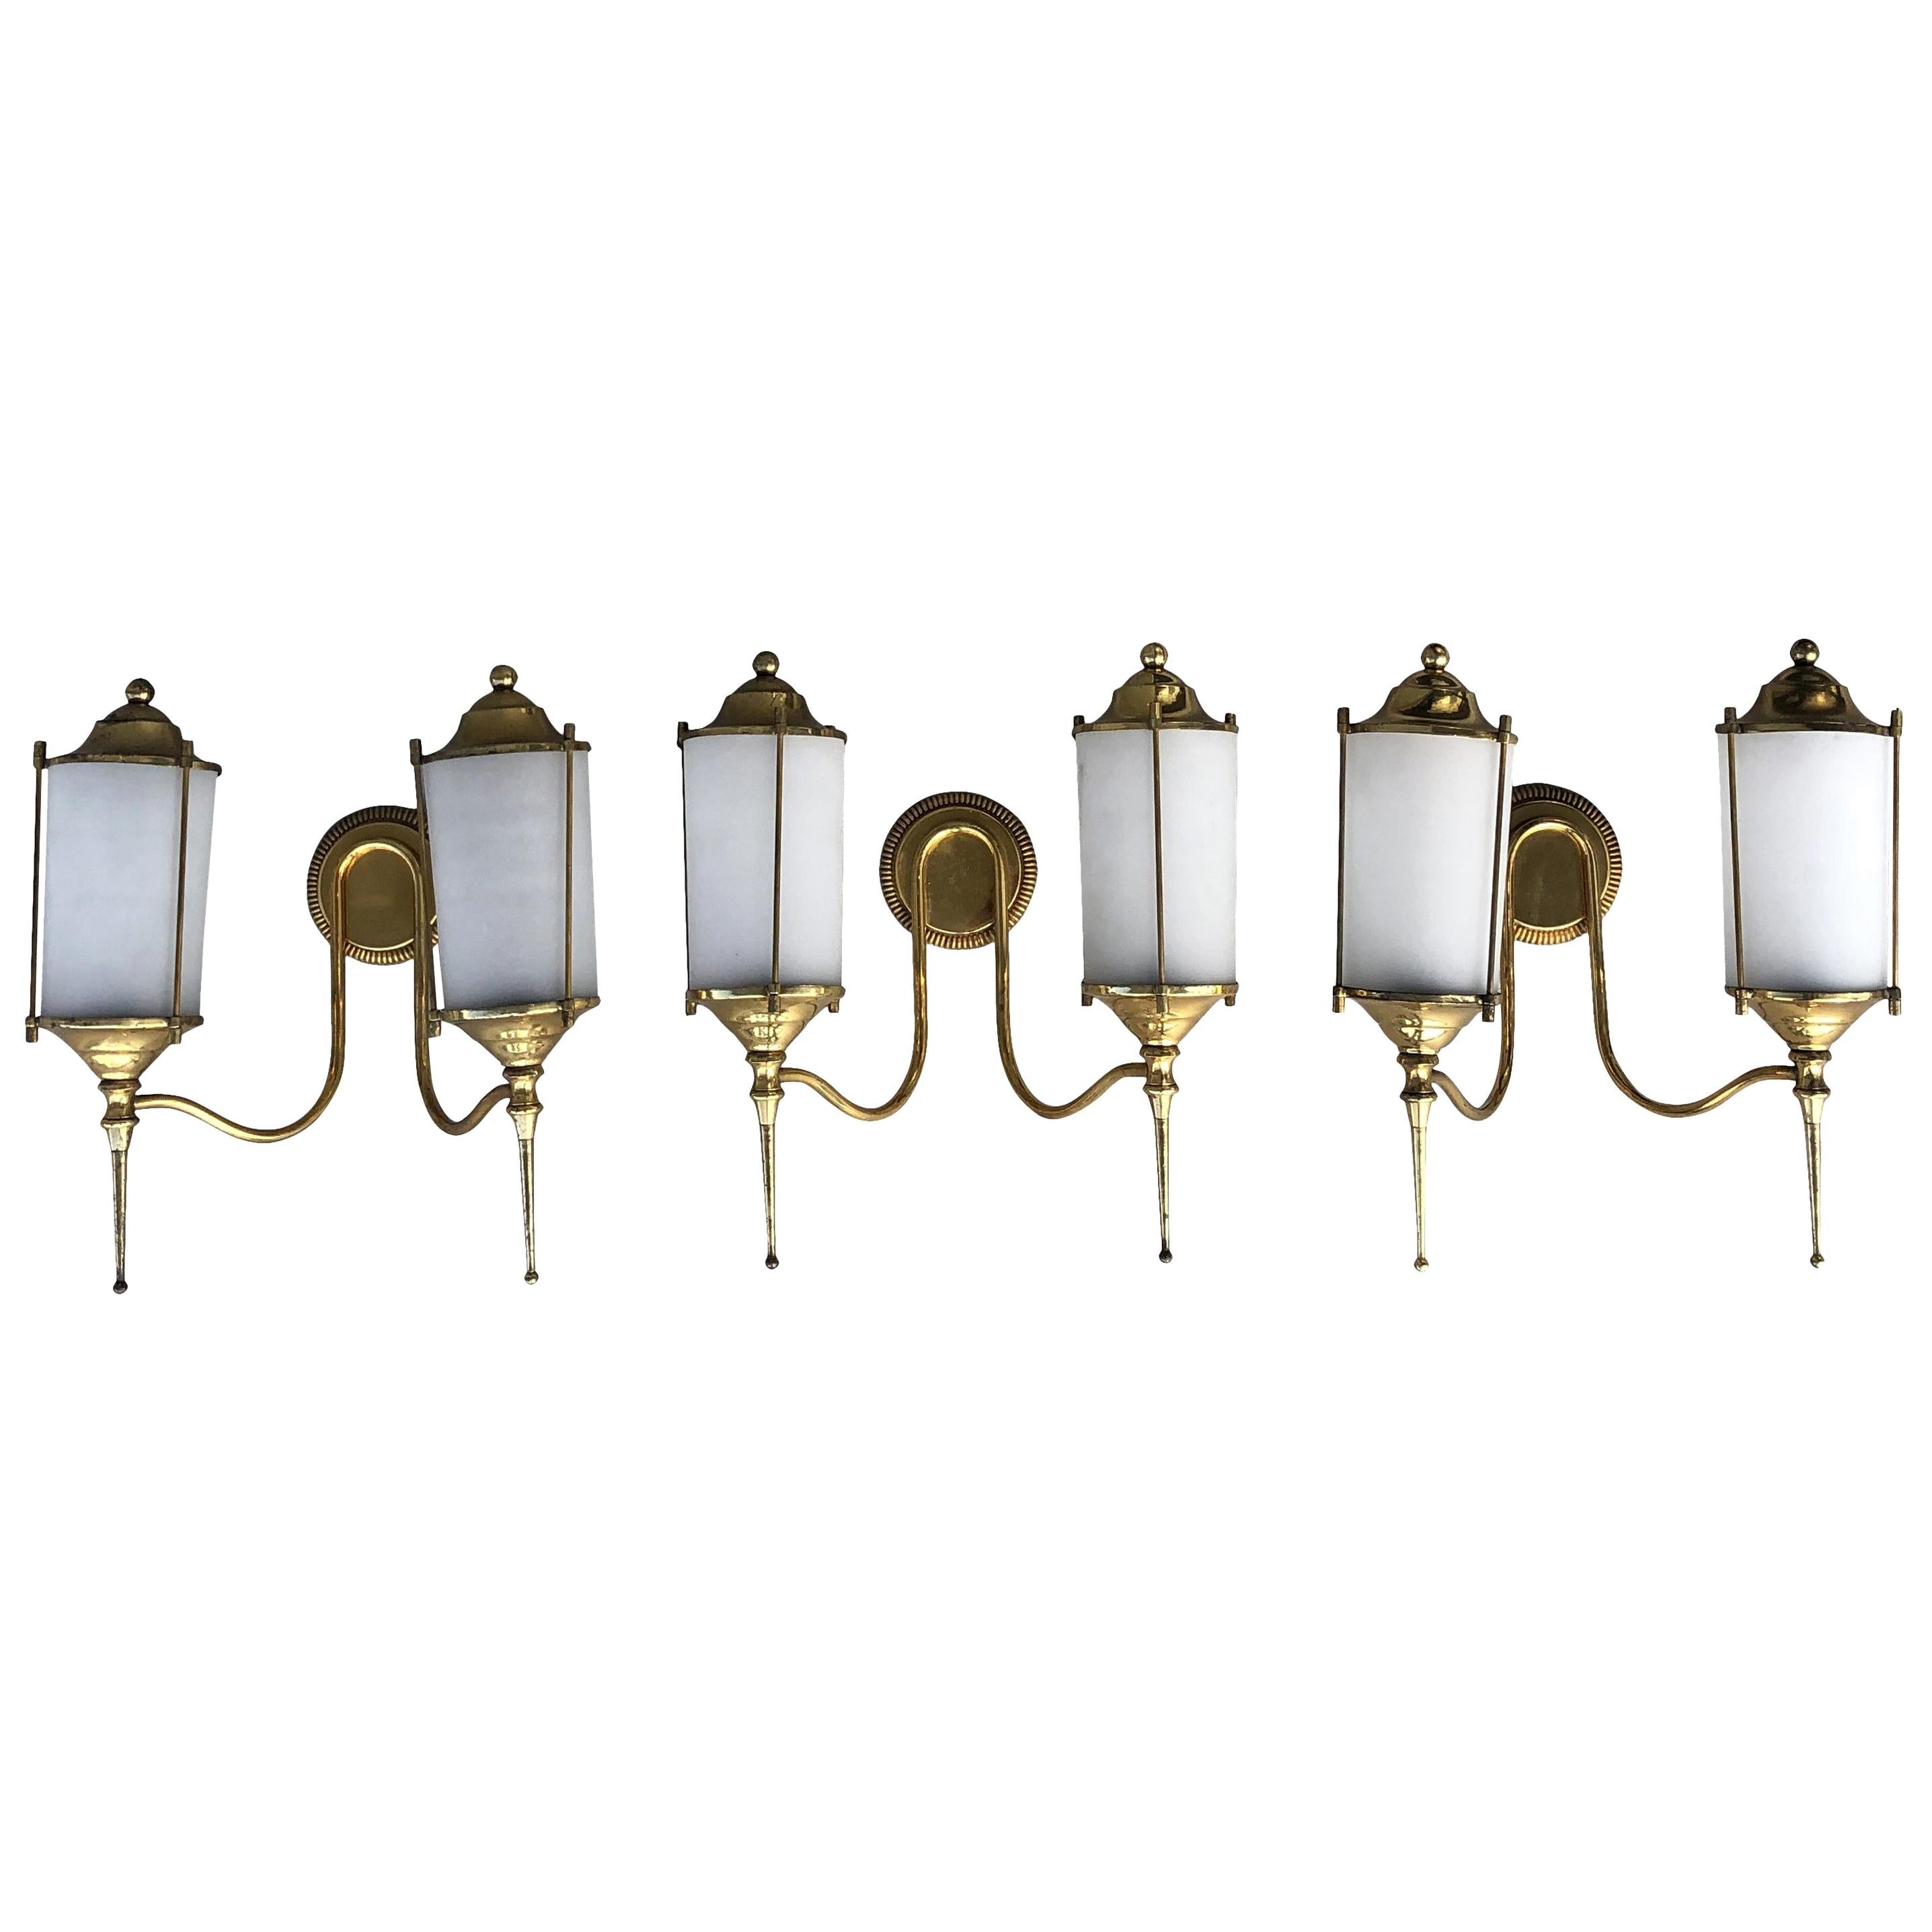 A vintage Mid-Century Modern Italian set of three double light appliques, sconces made of hand crafted brass and hand blown frosted Murano glass, in good condition. Each shade is featuring a one light socket. The wires have been renewed. Wear